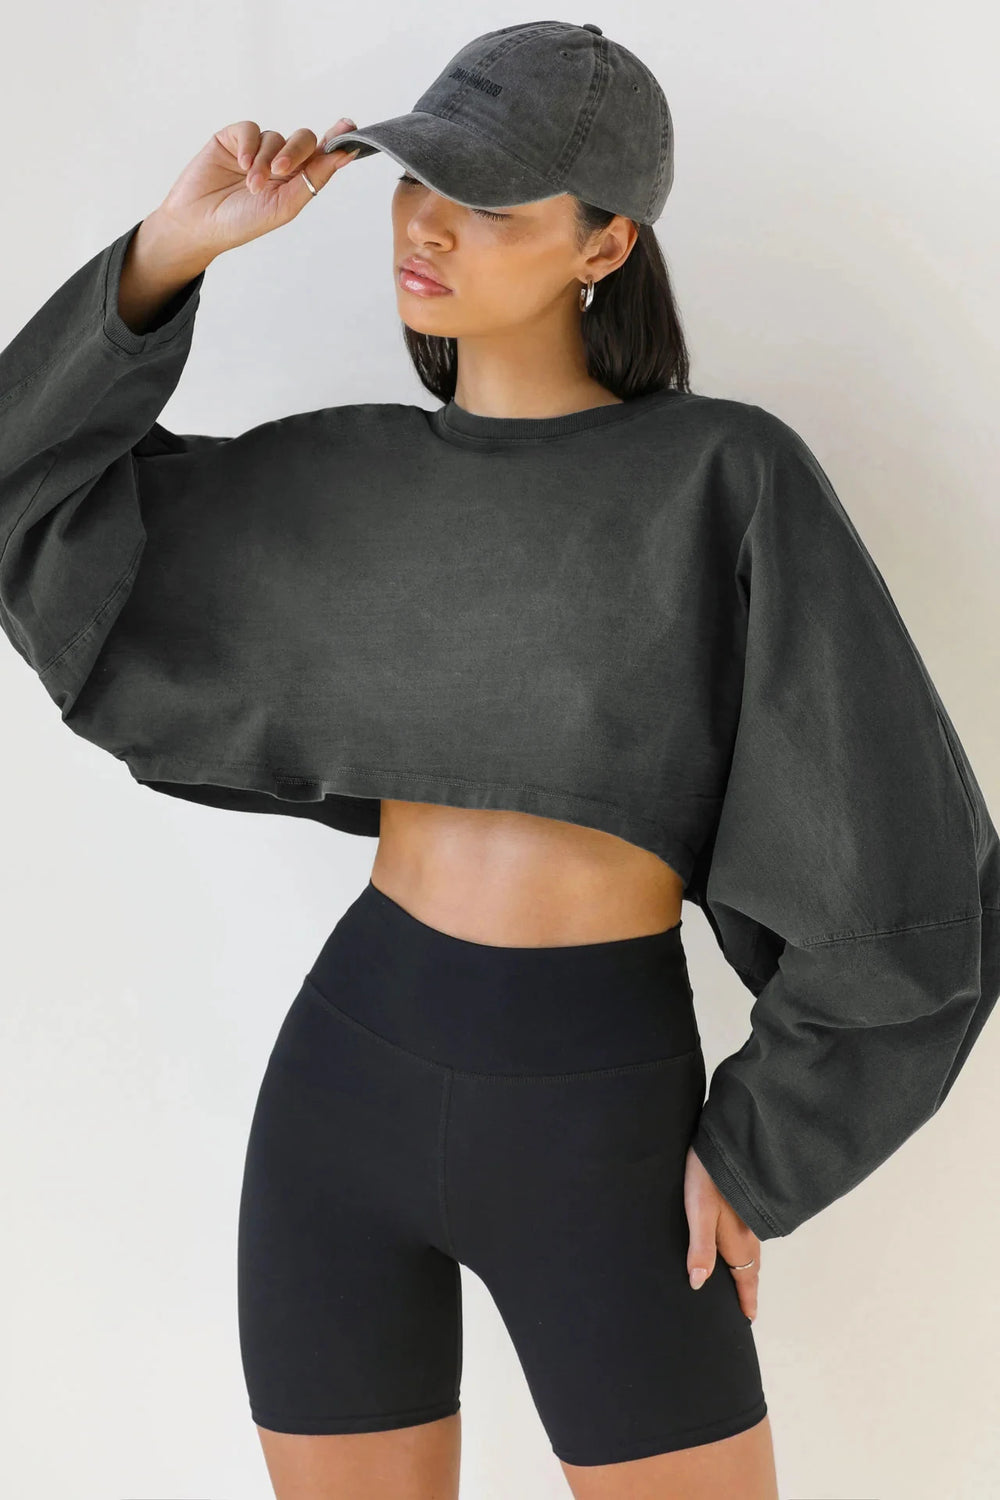 Wholesale Long Sleeve Crewneck Crop Top TShirt Casual Solid Loose Fit Workout - Shaners Merchandise